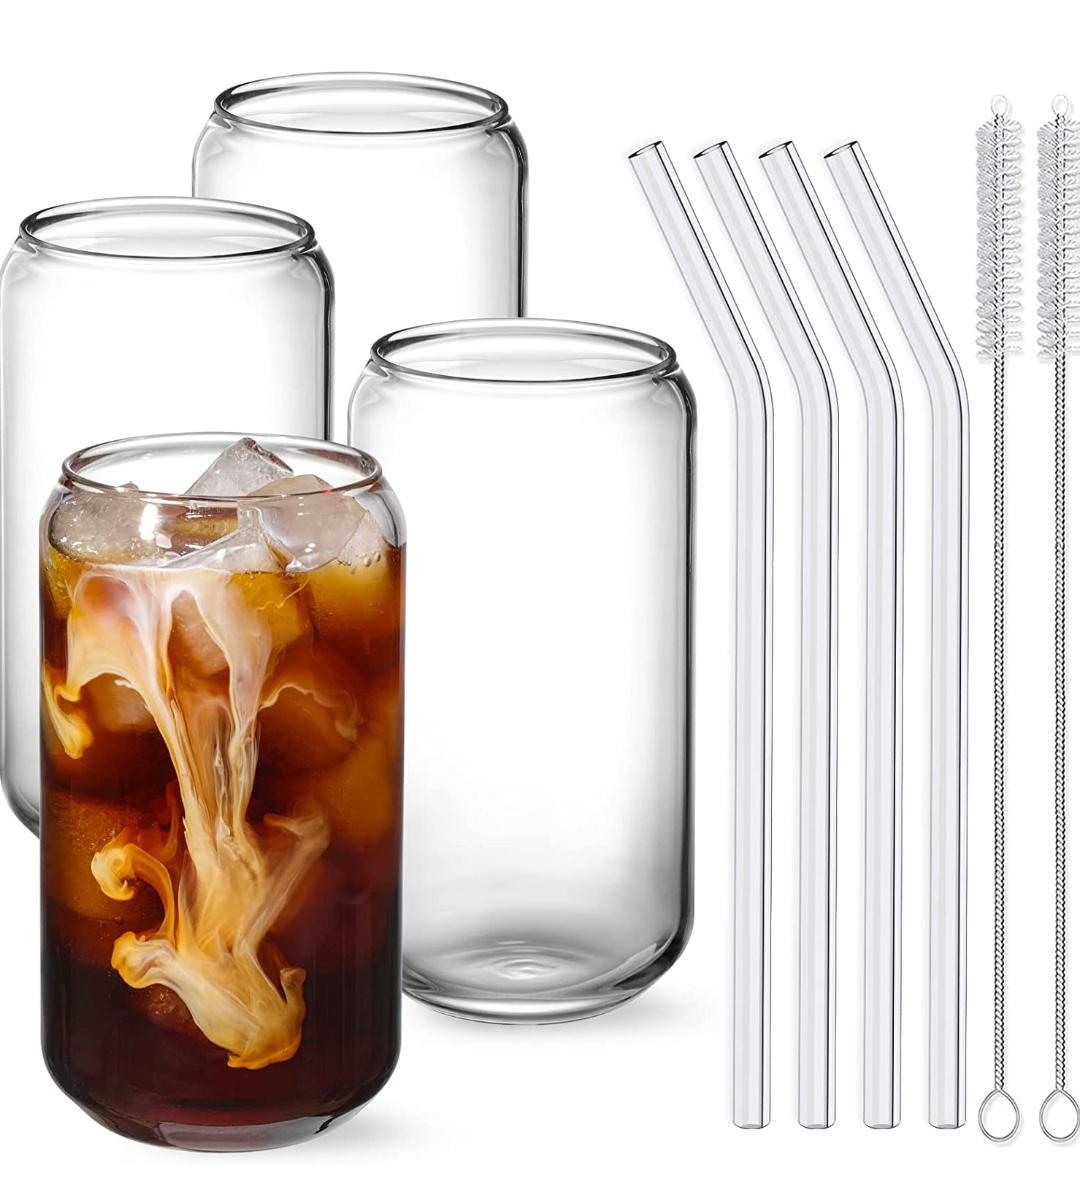 netany drinking glasses with glass straw christmas gifts for female coworkers under $20